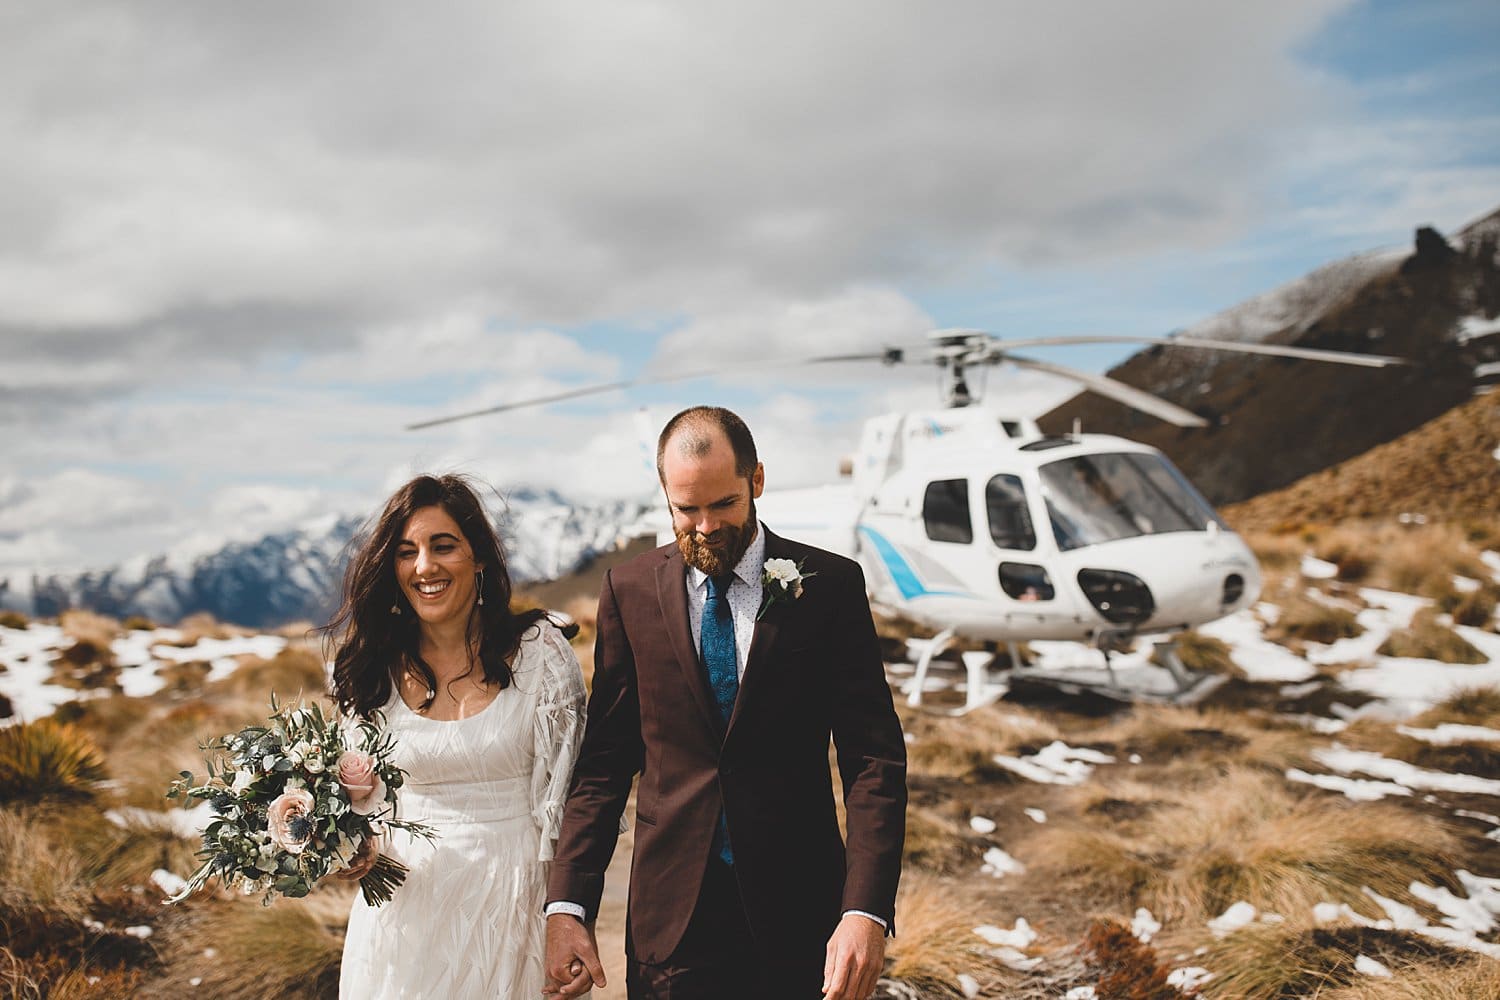 Queenstown Helicopter Wedding The Ledge